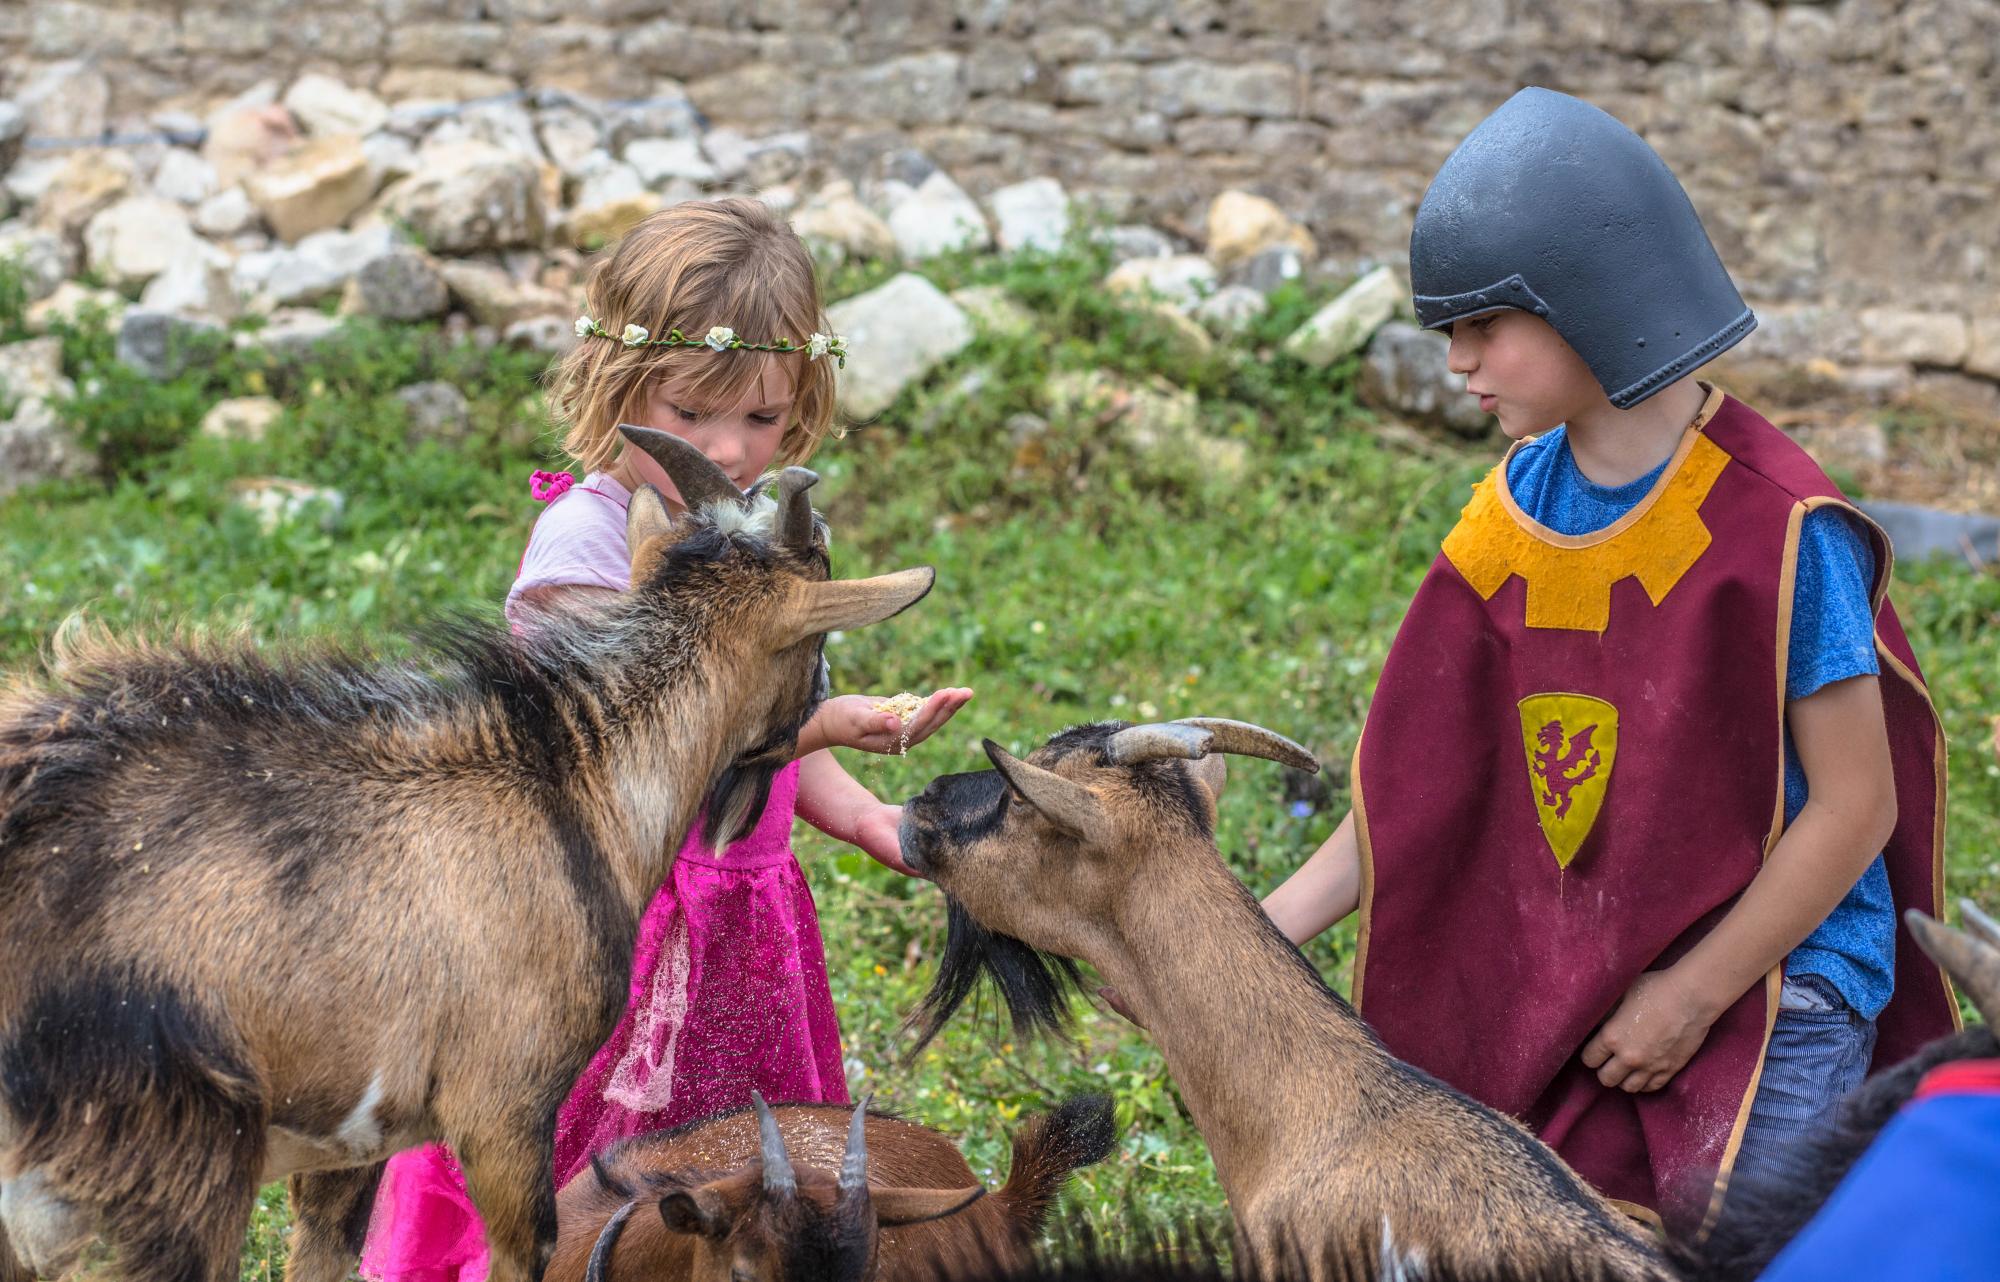 The castle farmyard - Fortified castle and medieval theme park in Charente Maritime